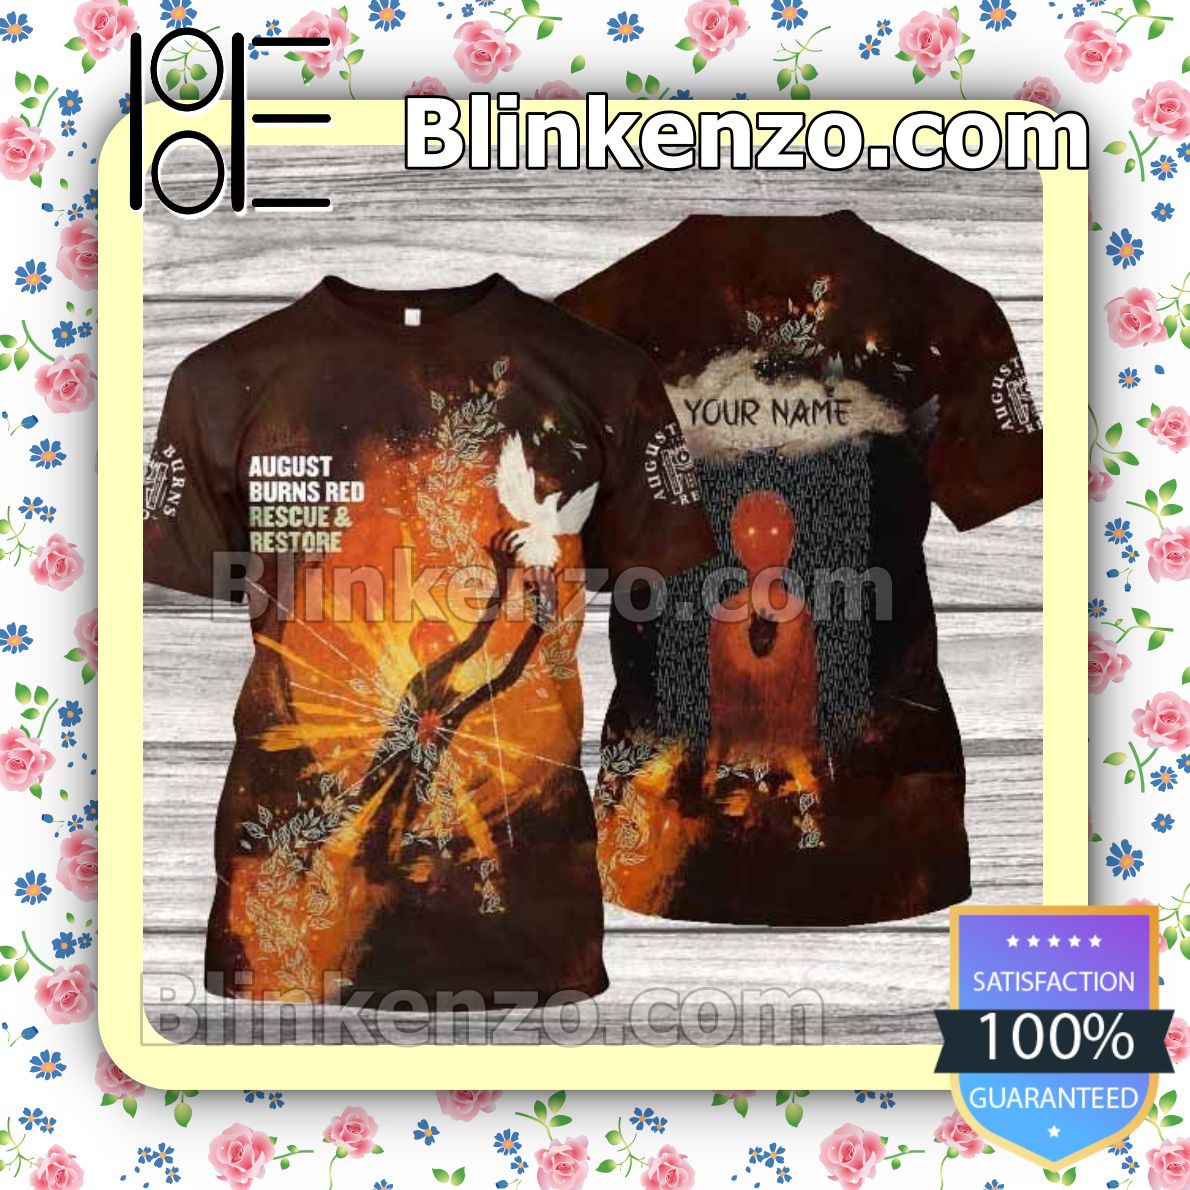 Personalized August Burns Red Rescue And Restore Album Cover Custom T-shirts